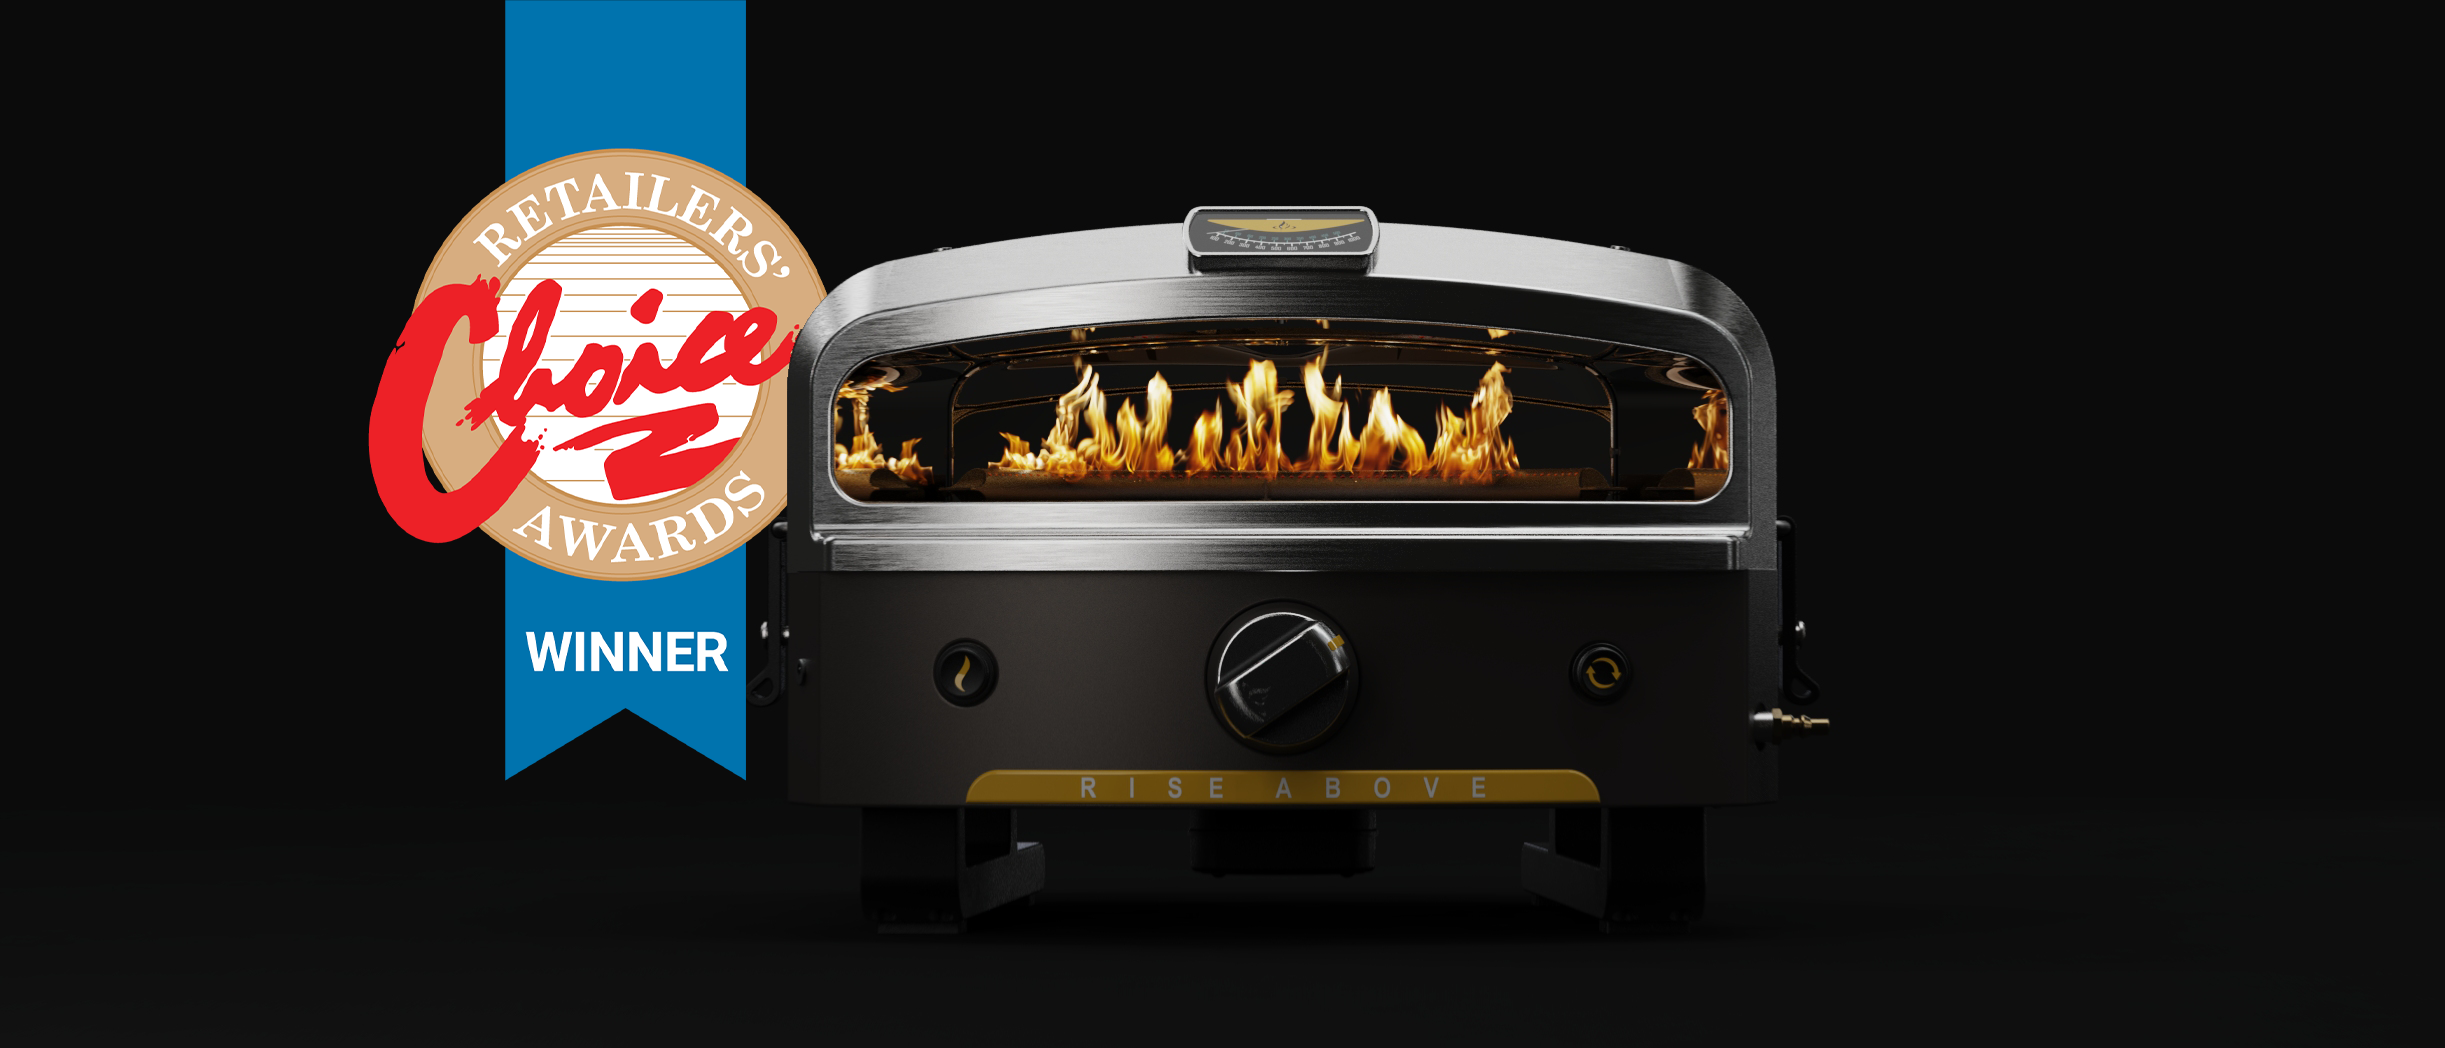 Halo Versa 16 Pizza Oven with Rotating Stone Retailers Award